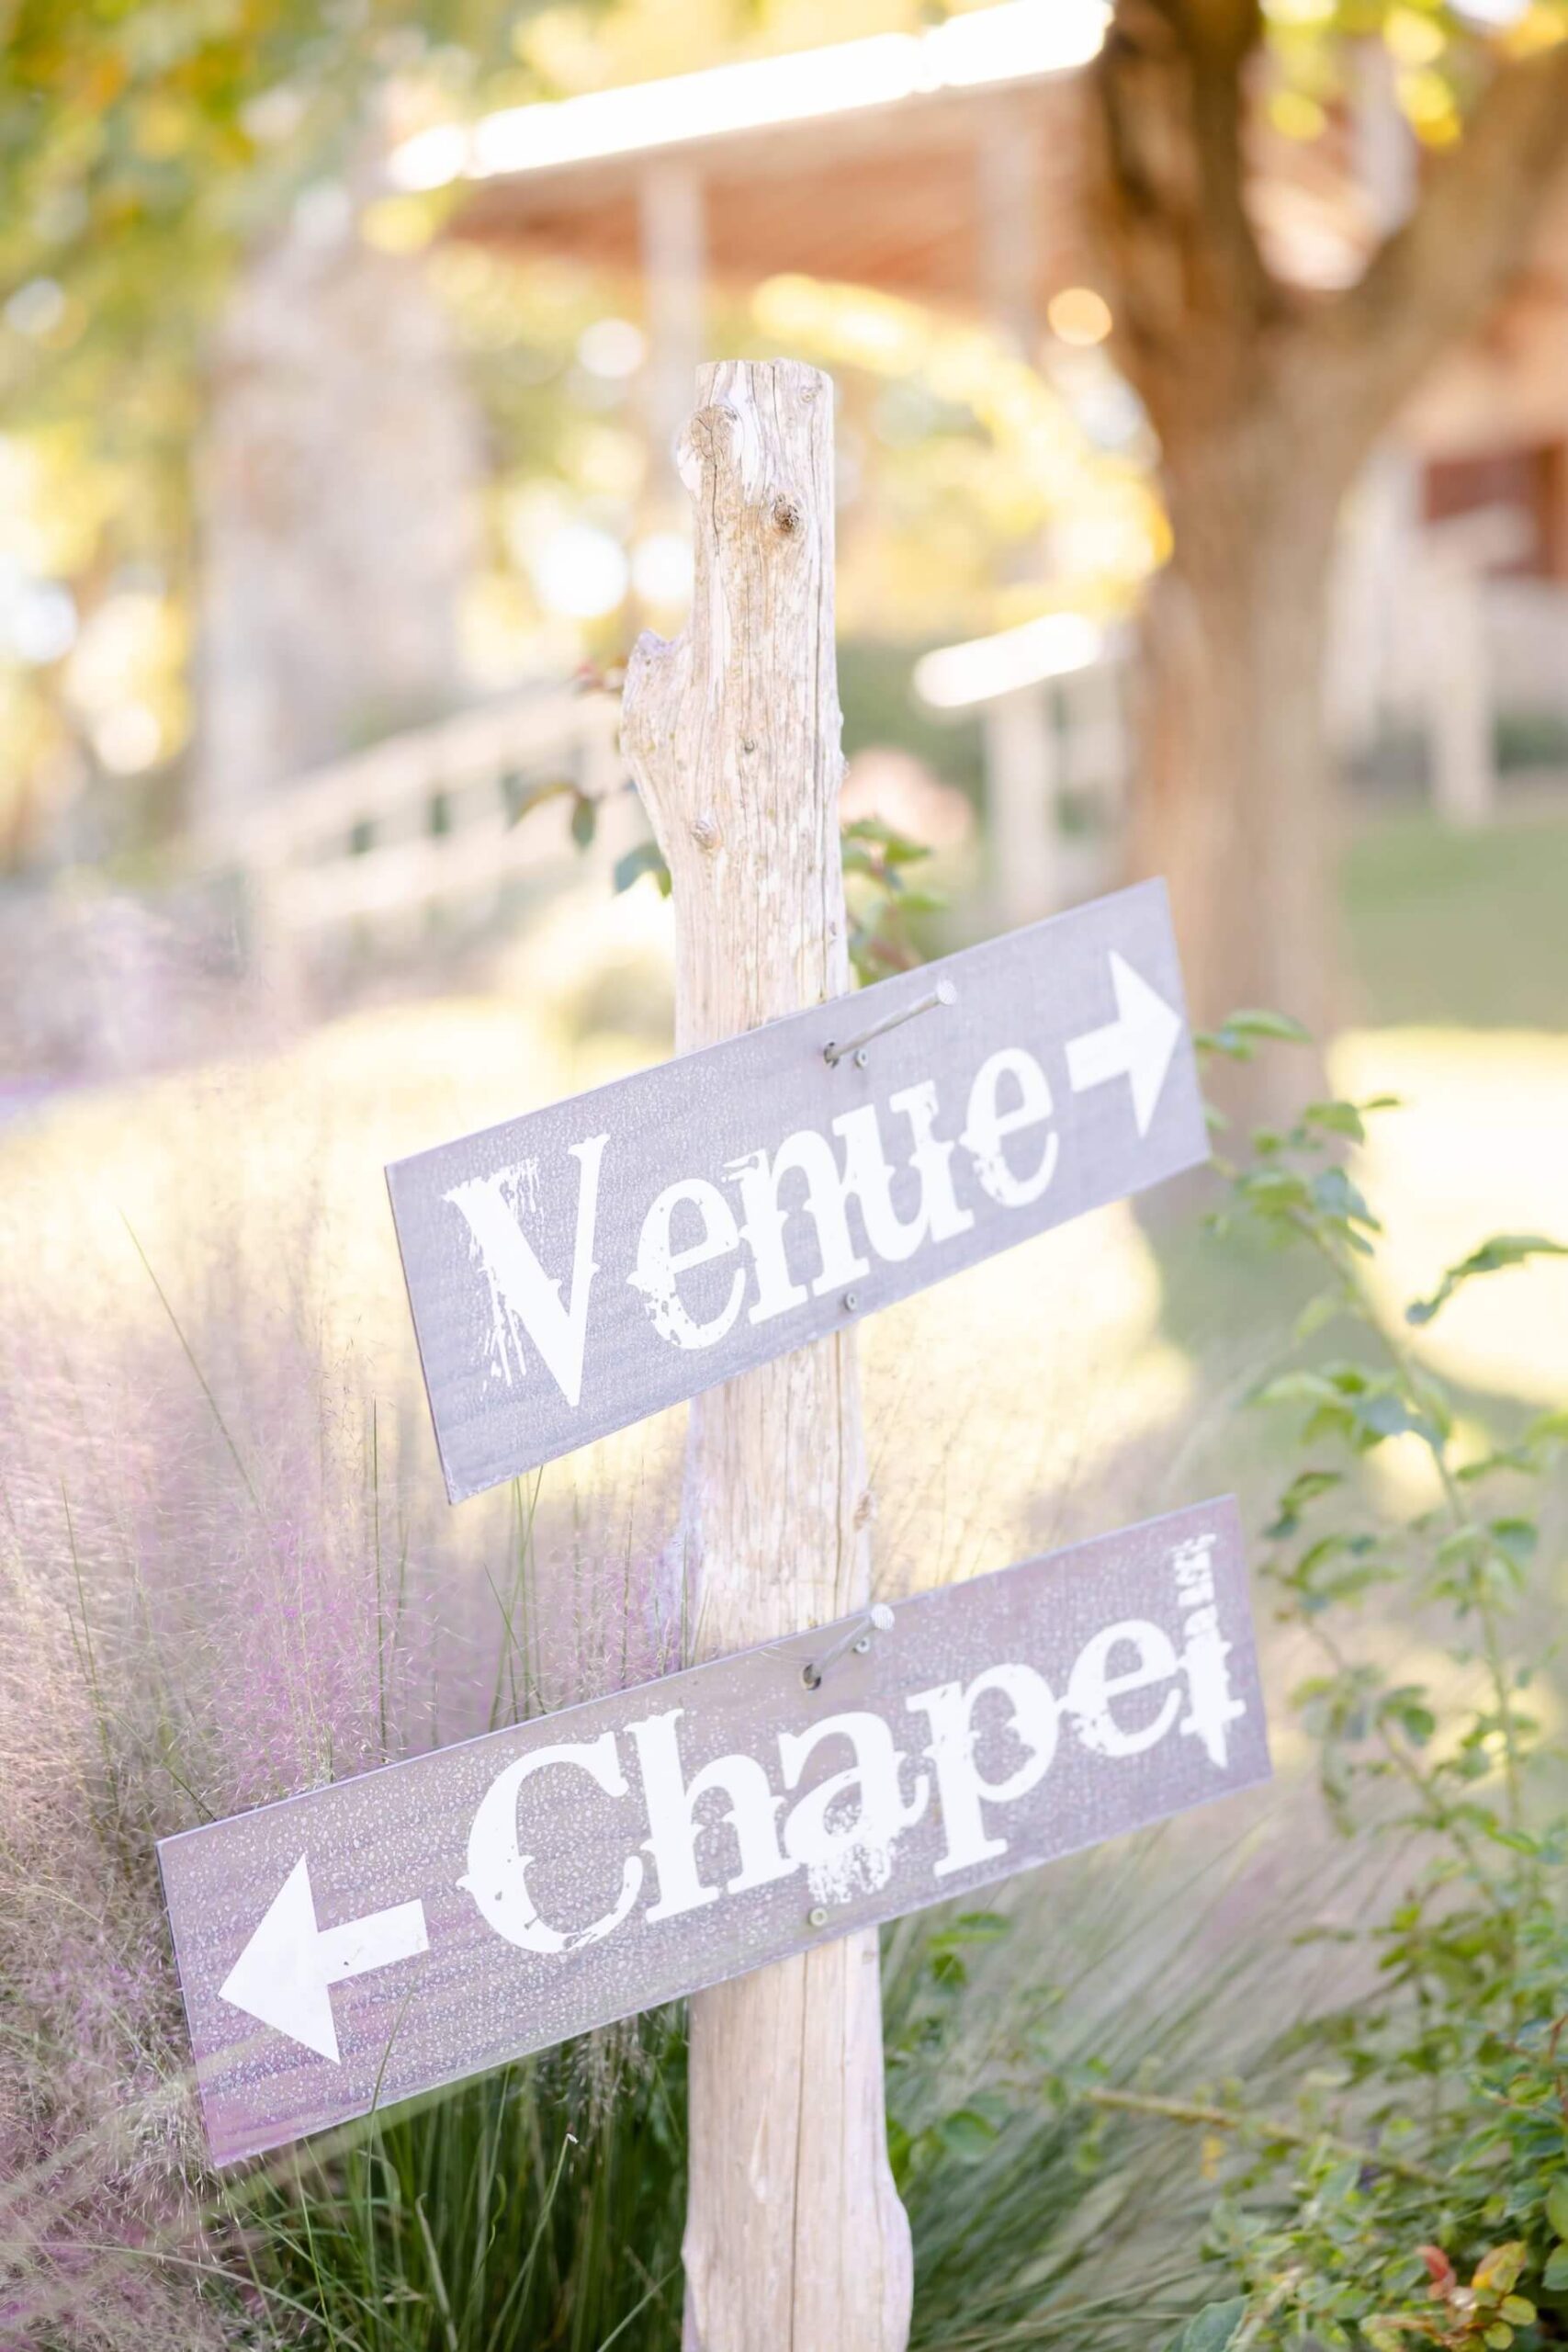 Vintage "venue" and "chapel" sign on wood post